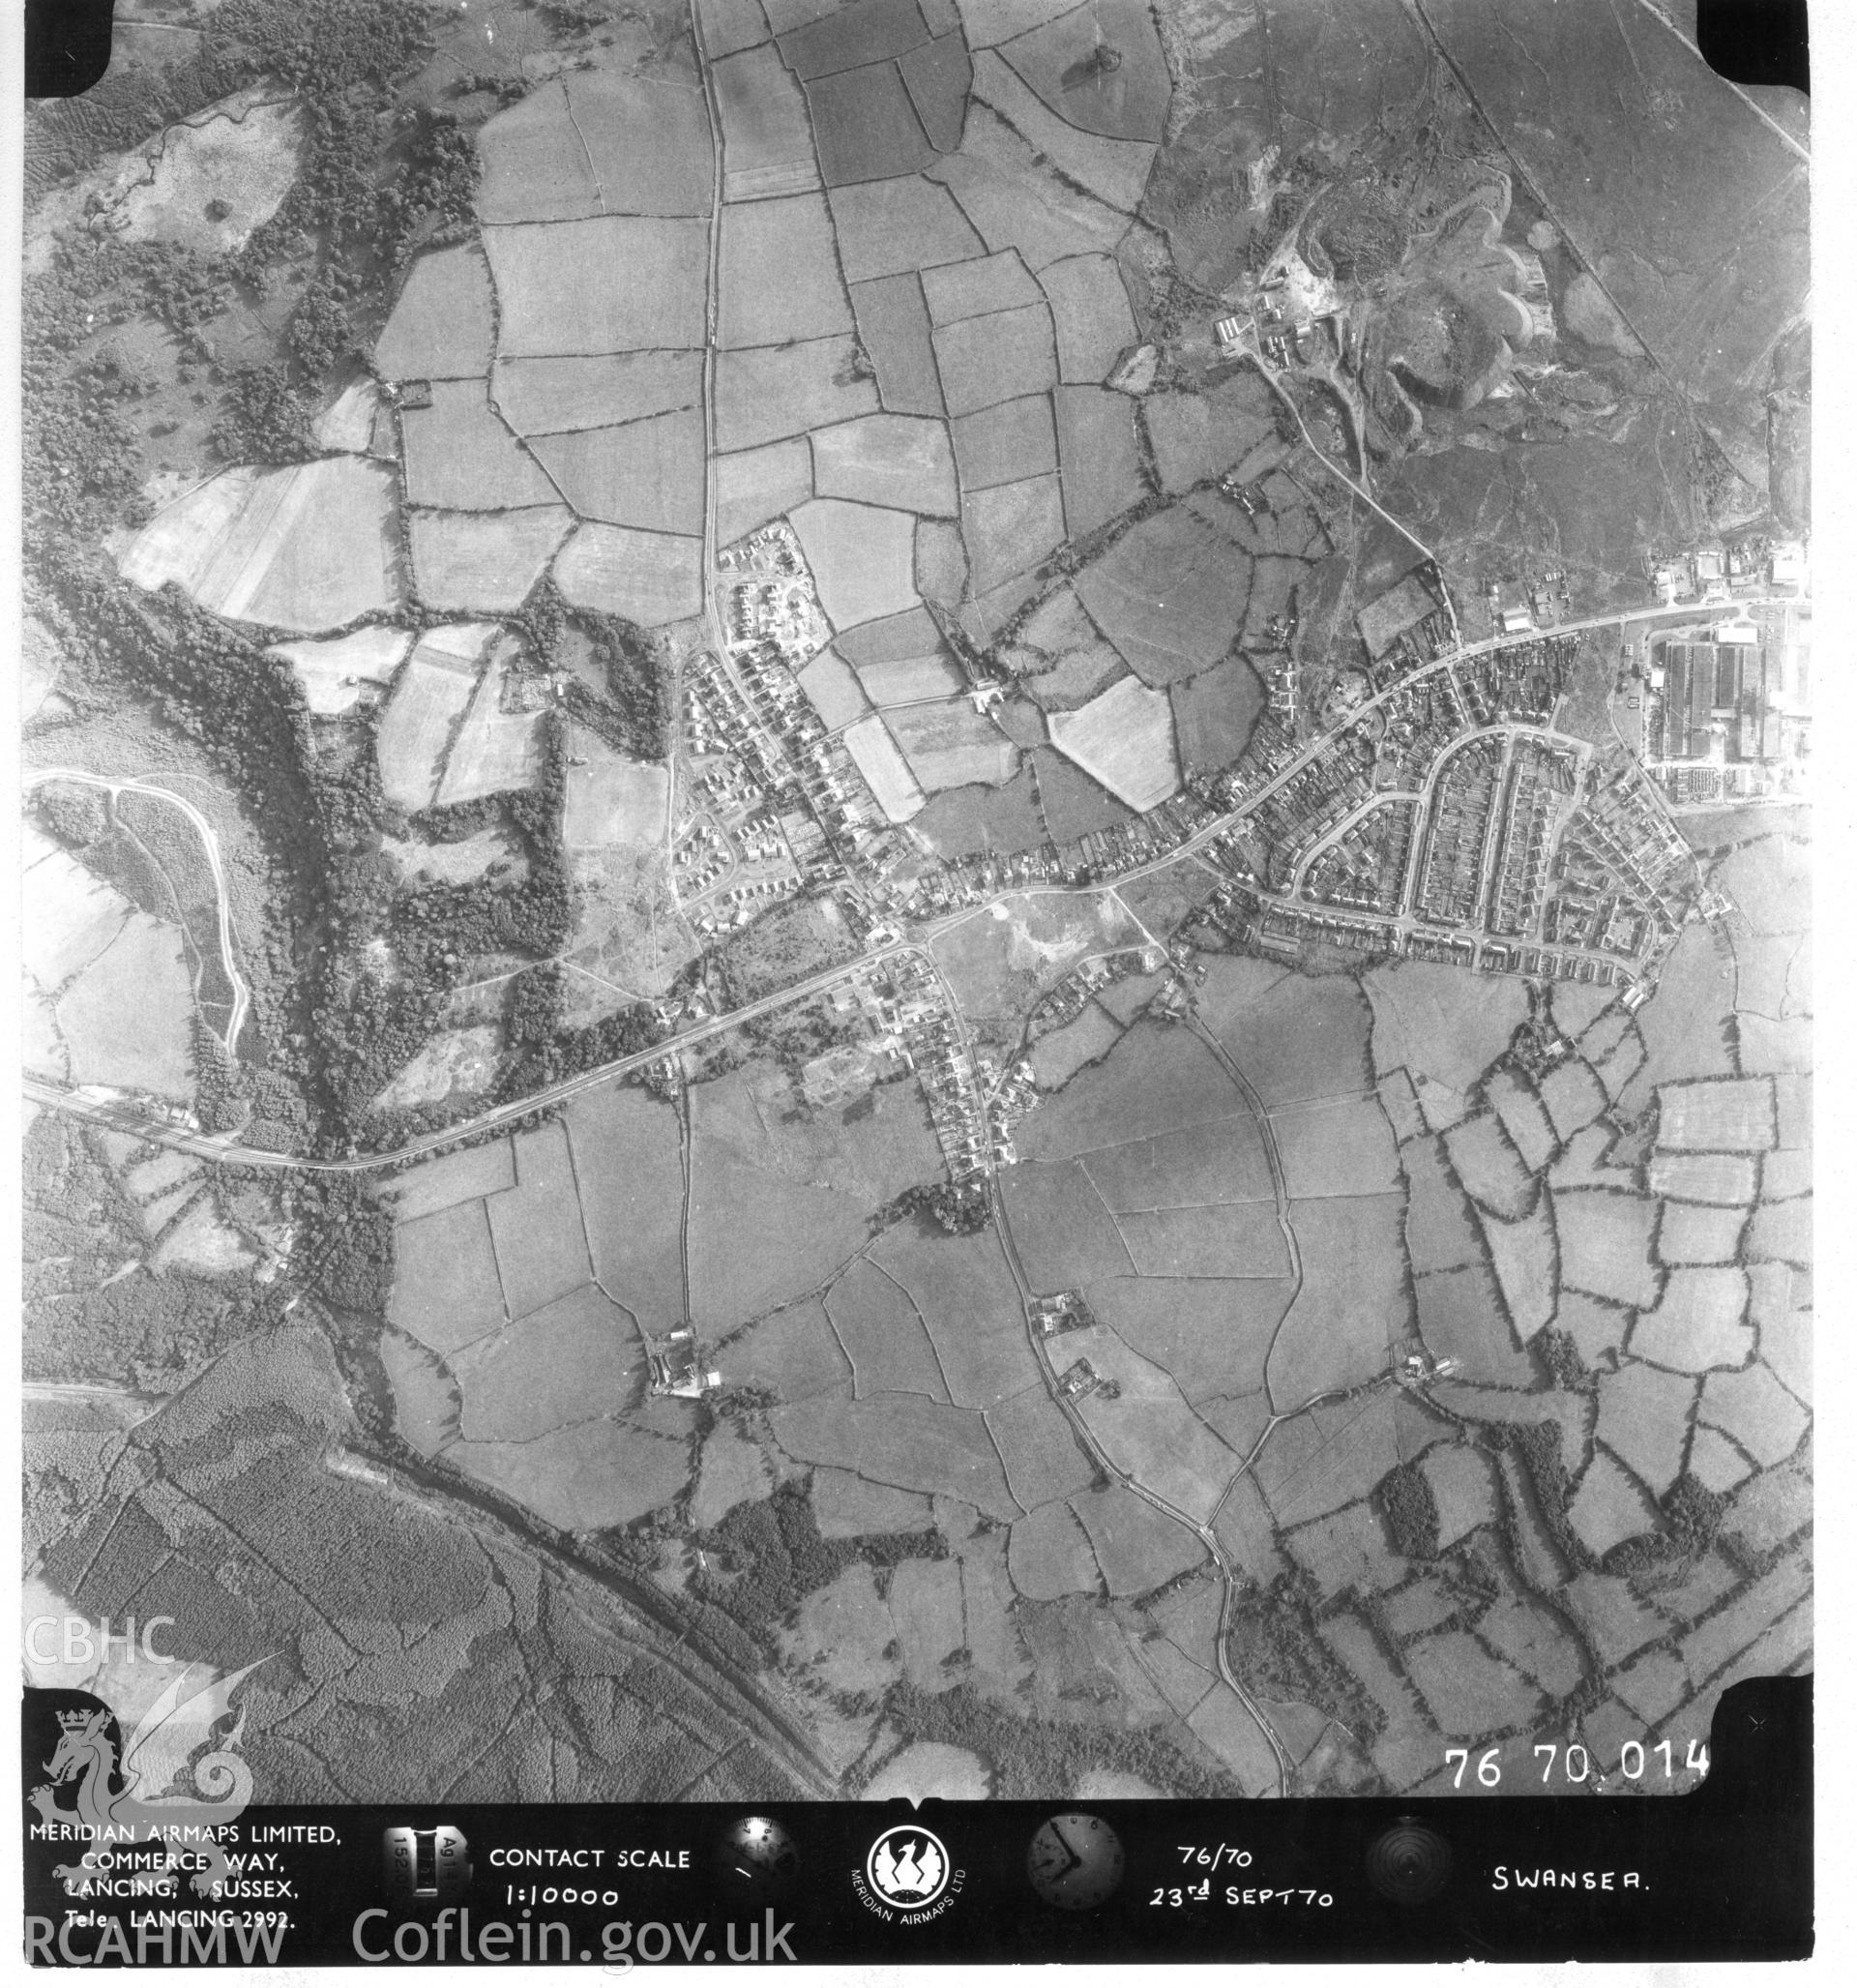 Black and white aerial photograph taken in 23rd September 1970. Part of material used in a Setting Impact Assessment of Land off Phoenix Way, Garngoch Business Village, Swansea, carried out by Archaeology Wales, 2018. Project number P2631.